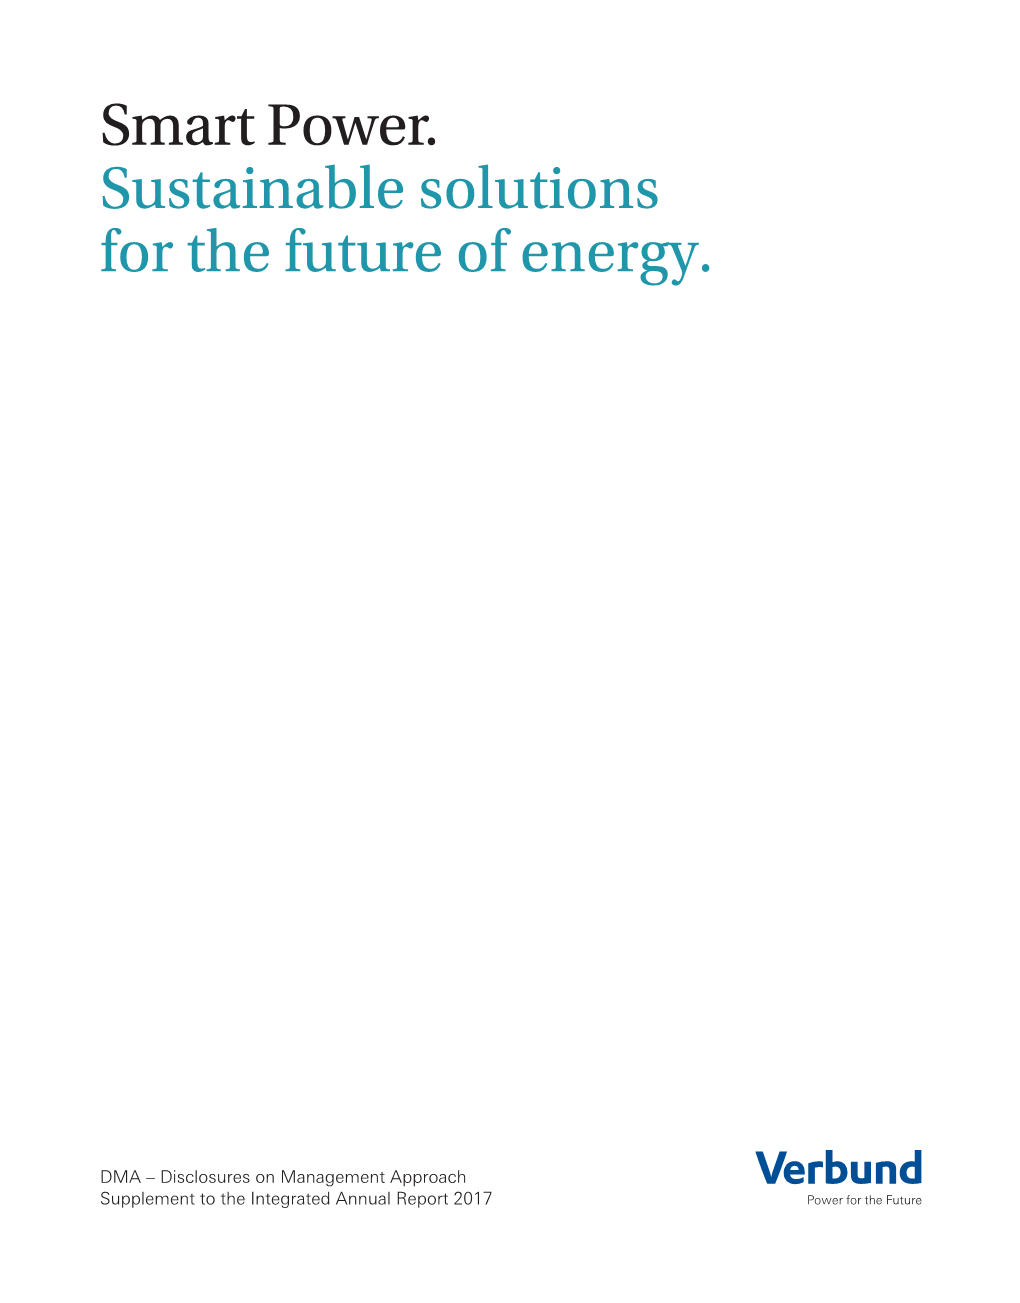 Smart Power. Sustainable Solutions for the Future of Energy